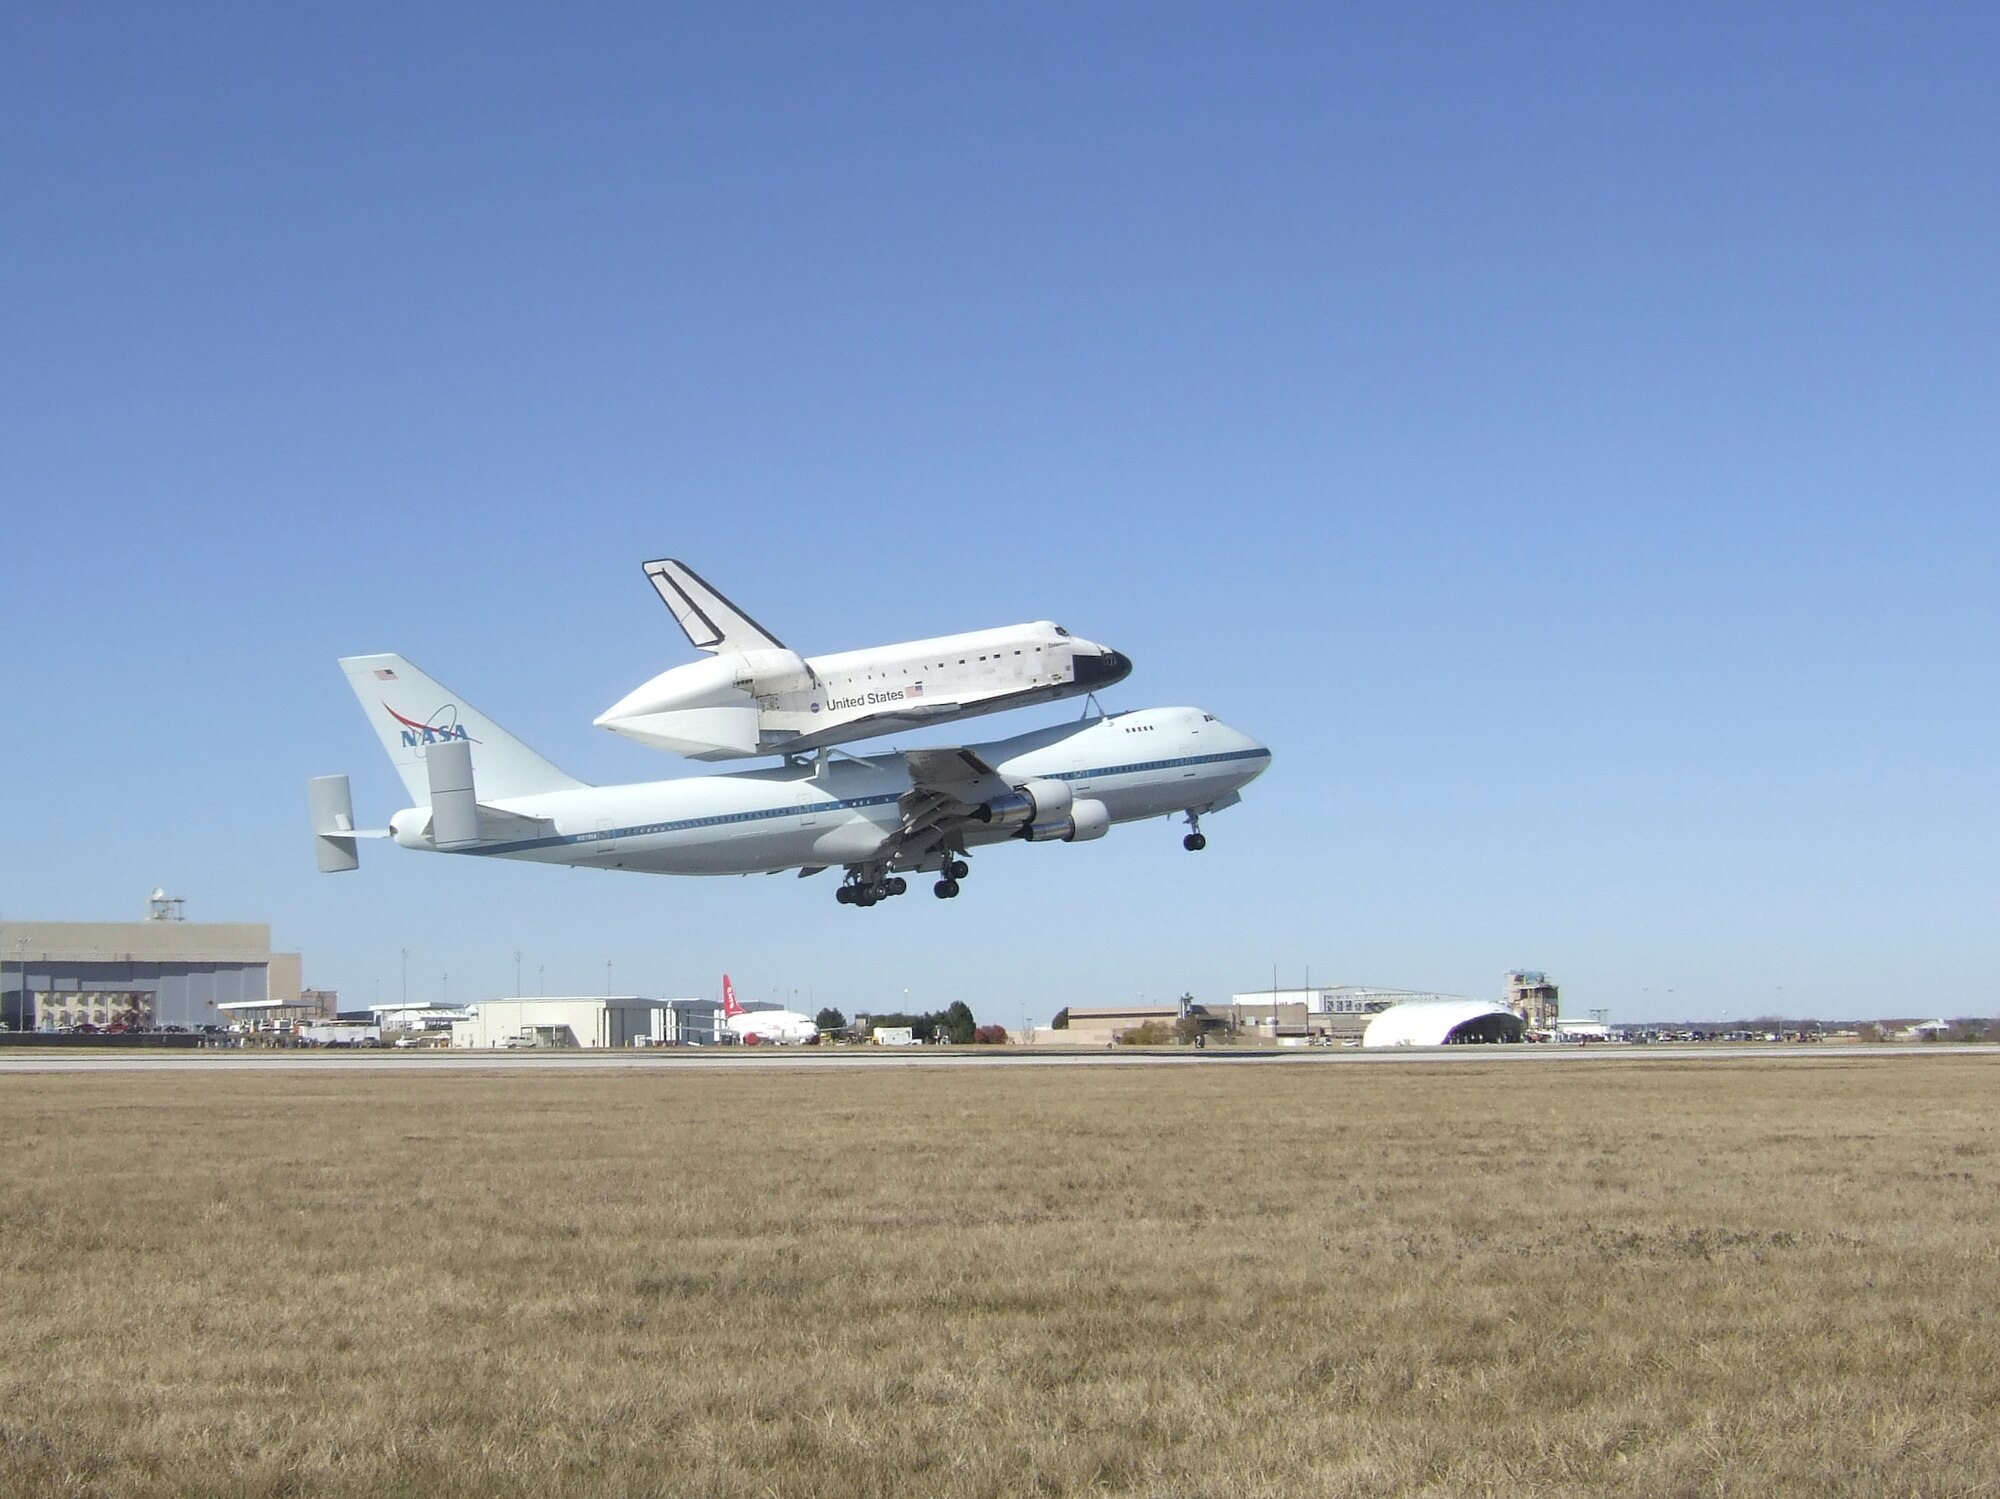 The Space Shuttle Endeavour and its Shuttle Carrier Aircraft/Orbital Vehicle (SCA/OV) takes off from Carswell Field on Naval Air Station, Joint Reserve Base, Fort Worth, Texas, after spending the night on Base. Carswell Field is the alternate landing location for the Space Shuttle due to its 1,200 ft runway. December 11, 2008 (USAF photo by Staff Sergeant Ivyann Castillo) 